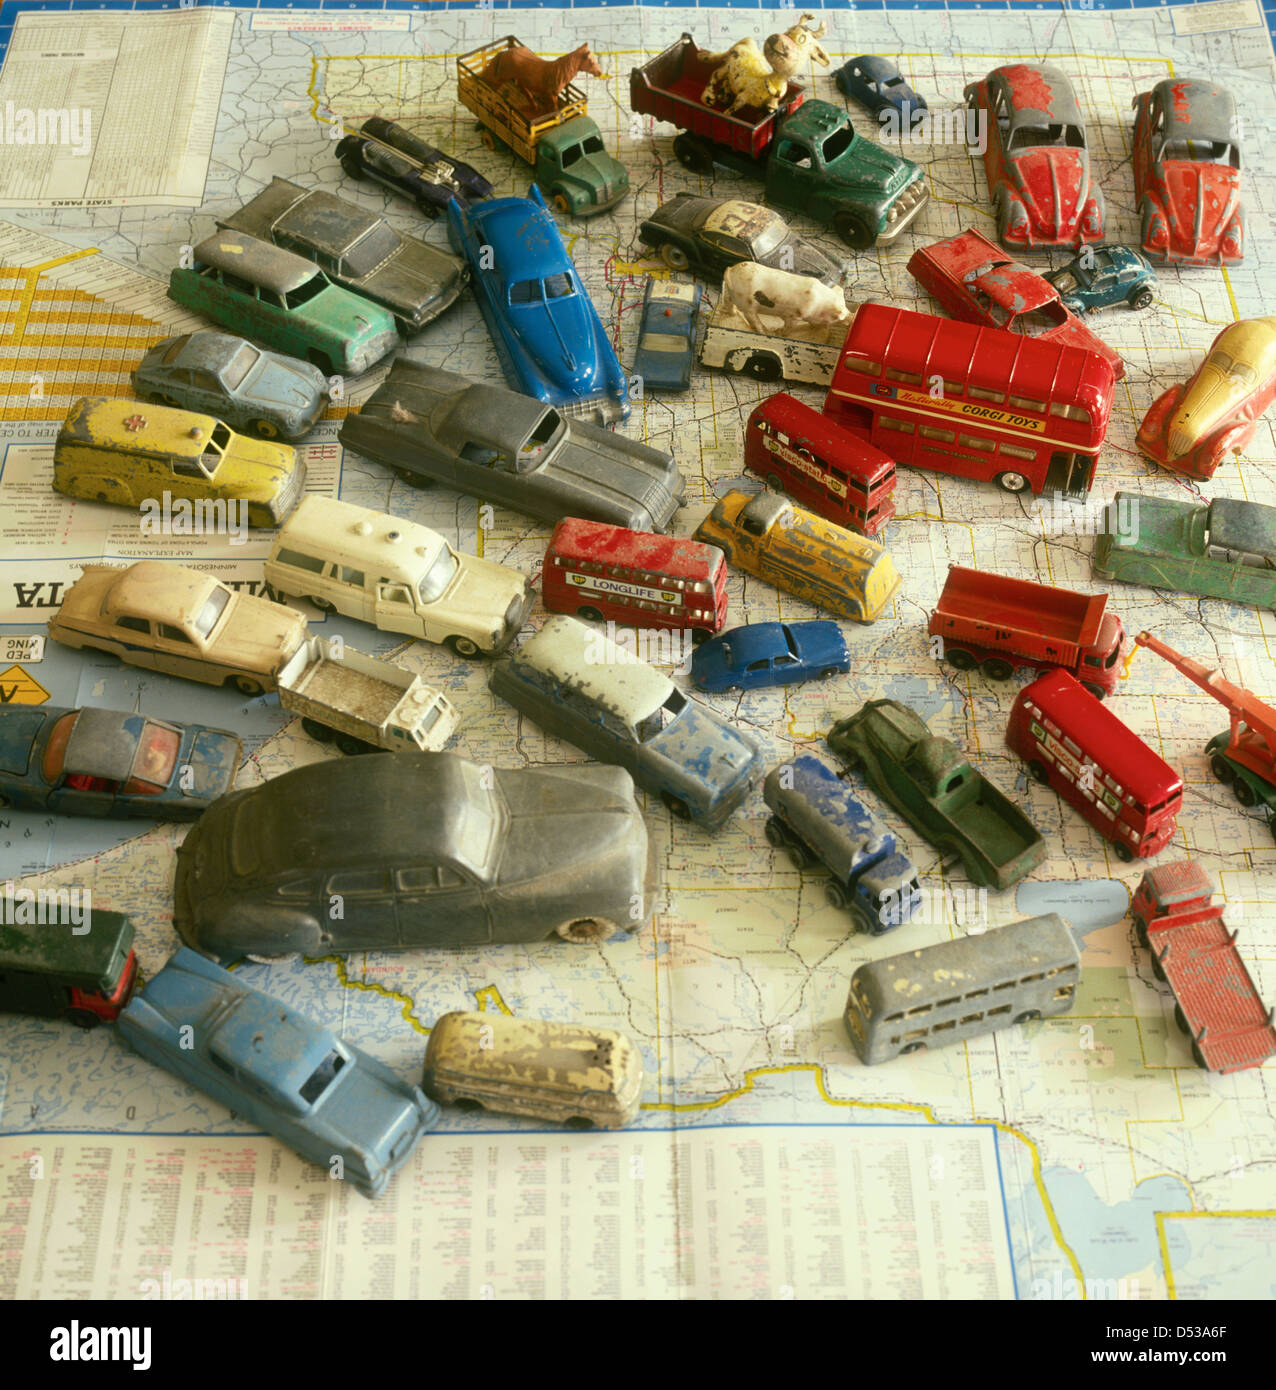 Antique collectable toy cars autos busses and trucks spread out over a Minnesota road map. Lincoln Nebraska NE USA Stock Photo